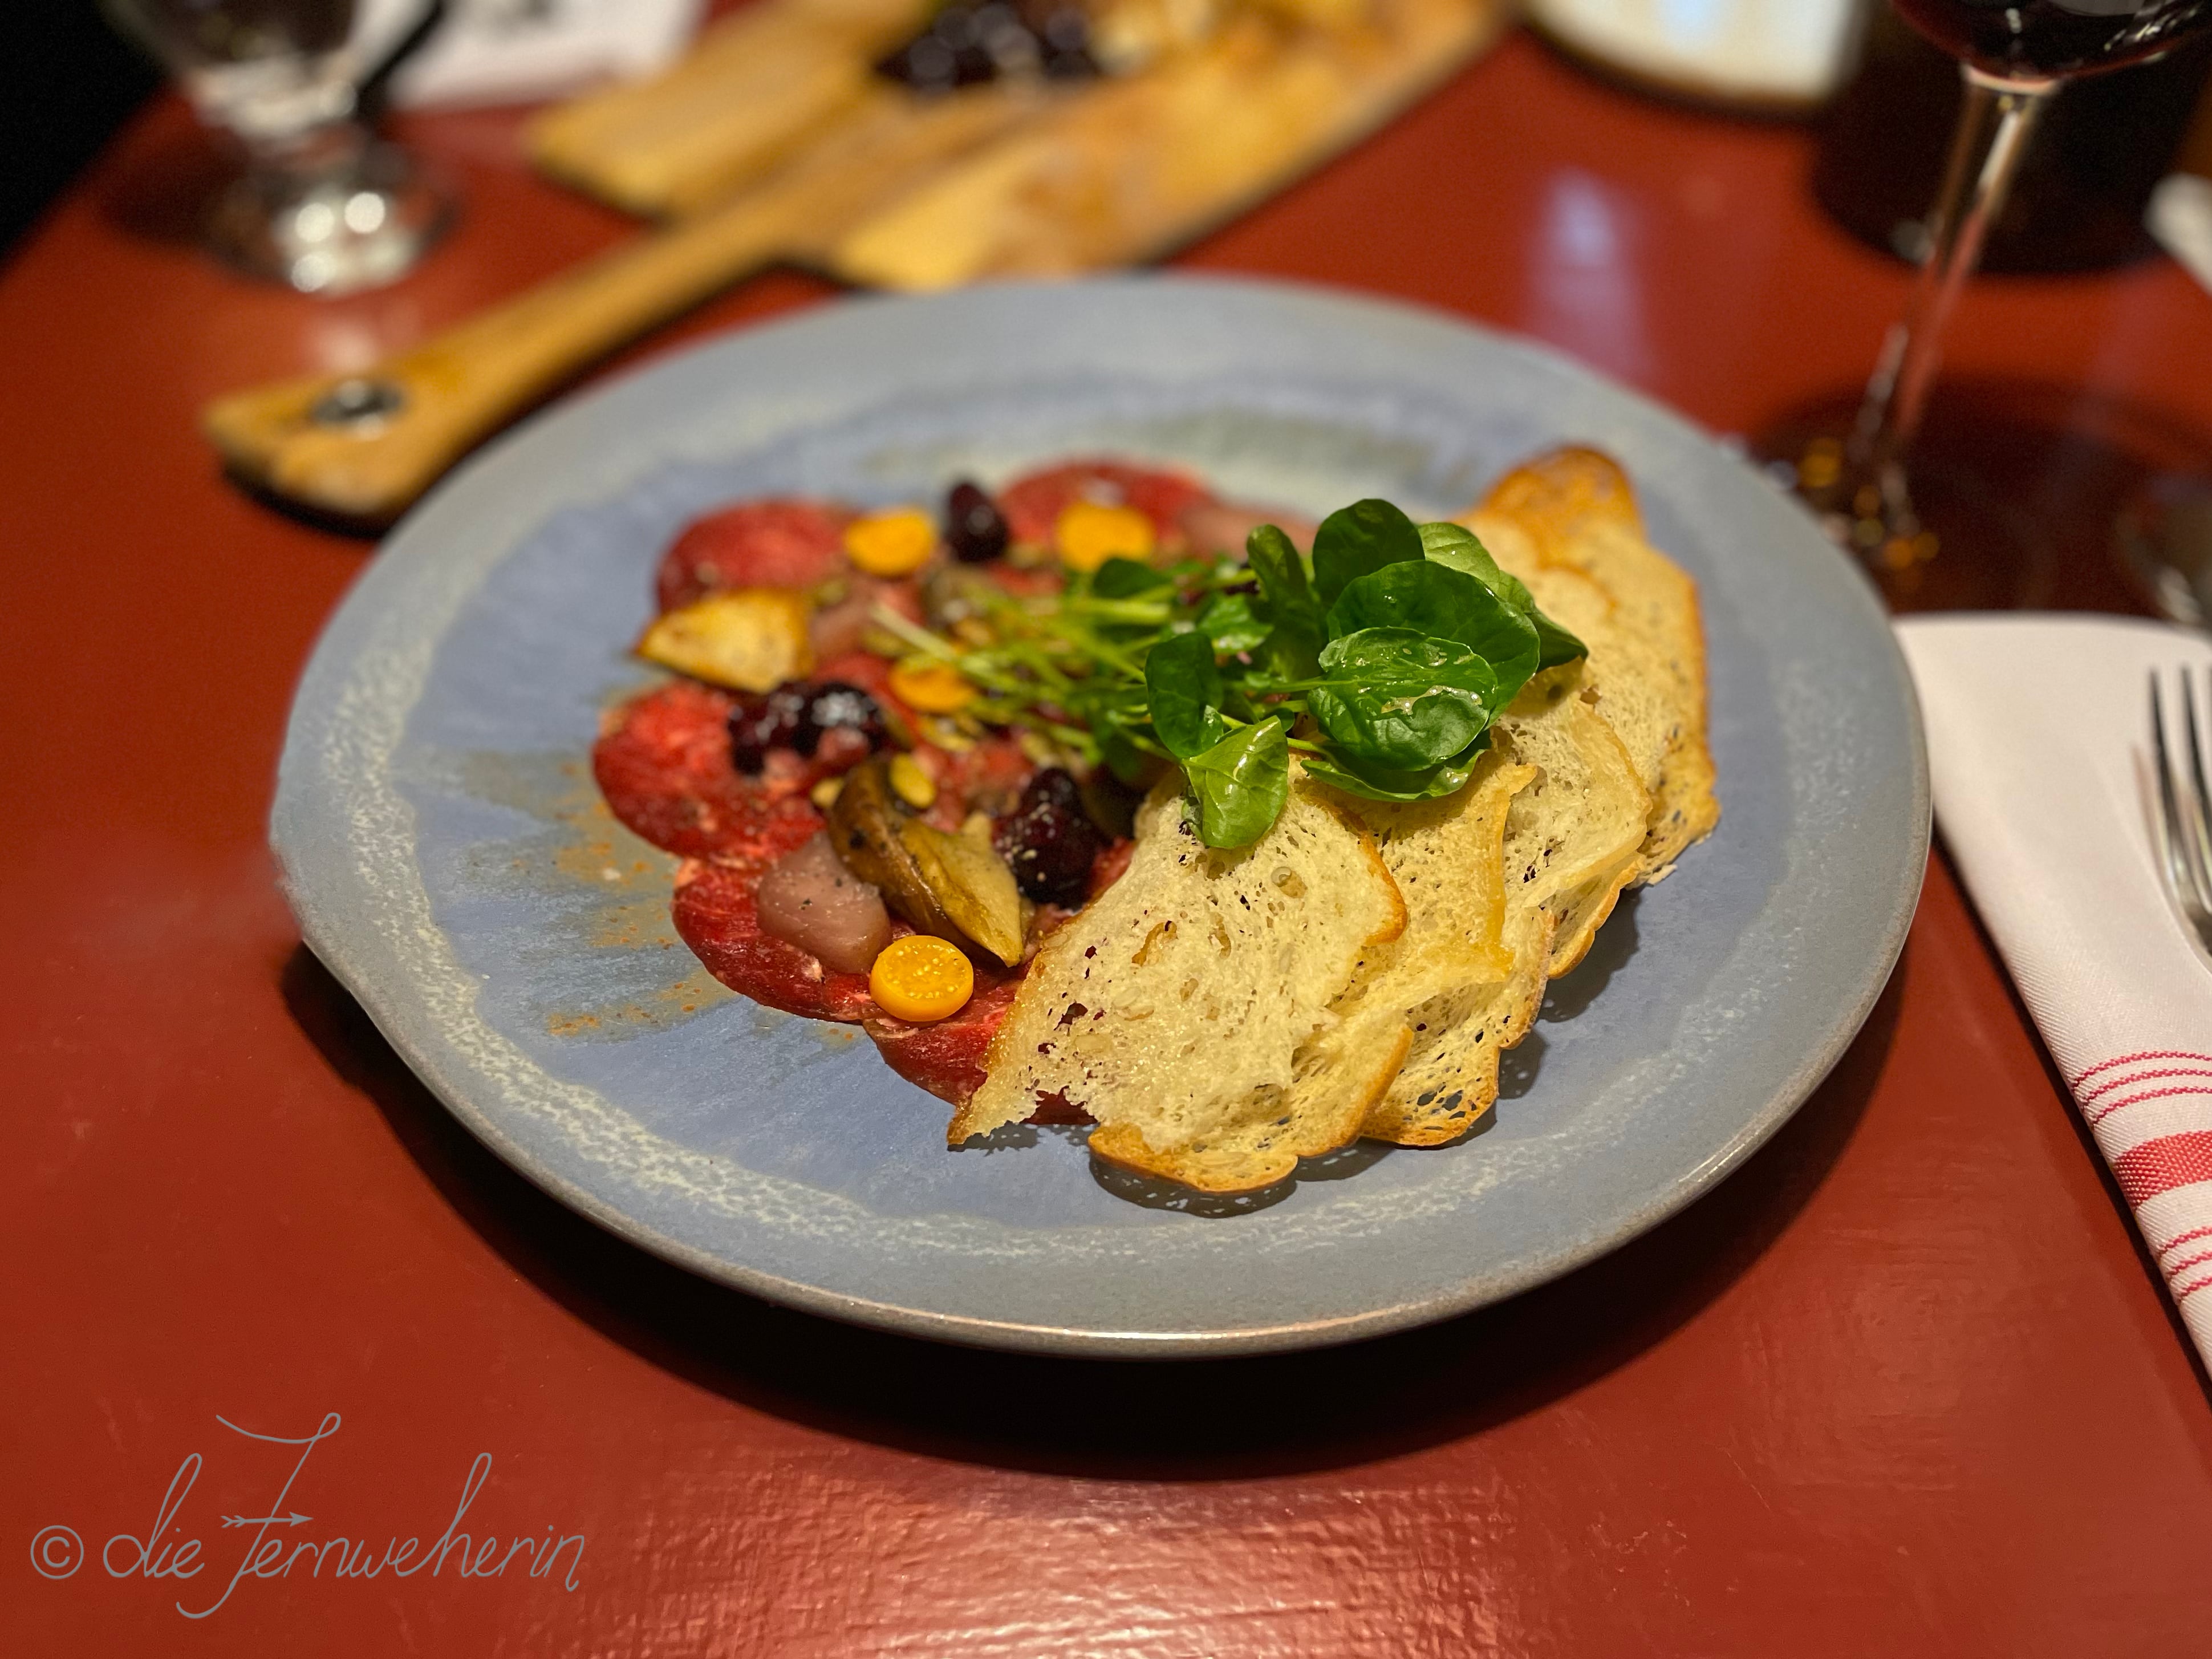 The delicious Bison Carpaccio appetizer at Storm Mountain Lodge, accompanied by house-made crostini, pickled berries, capers, peppery greens, and local mushrooms.